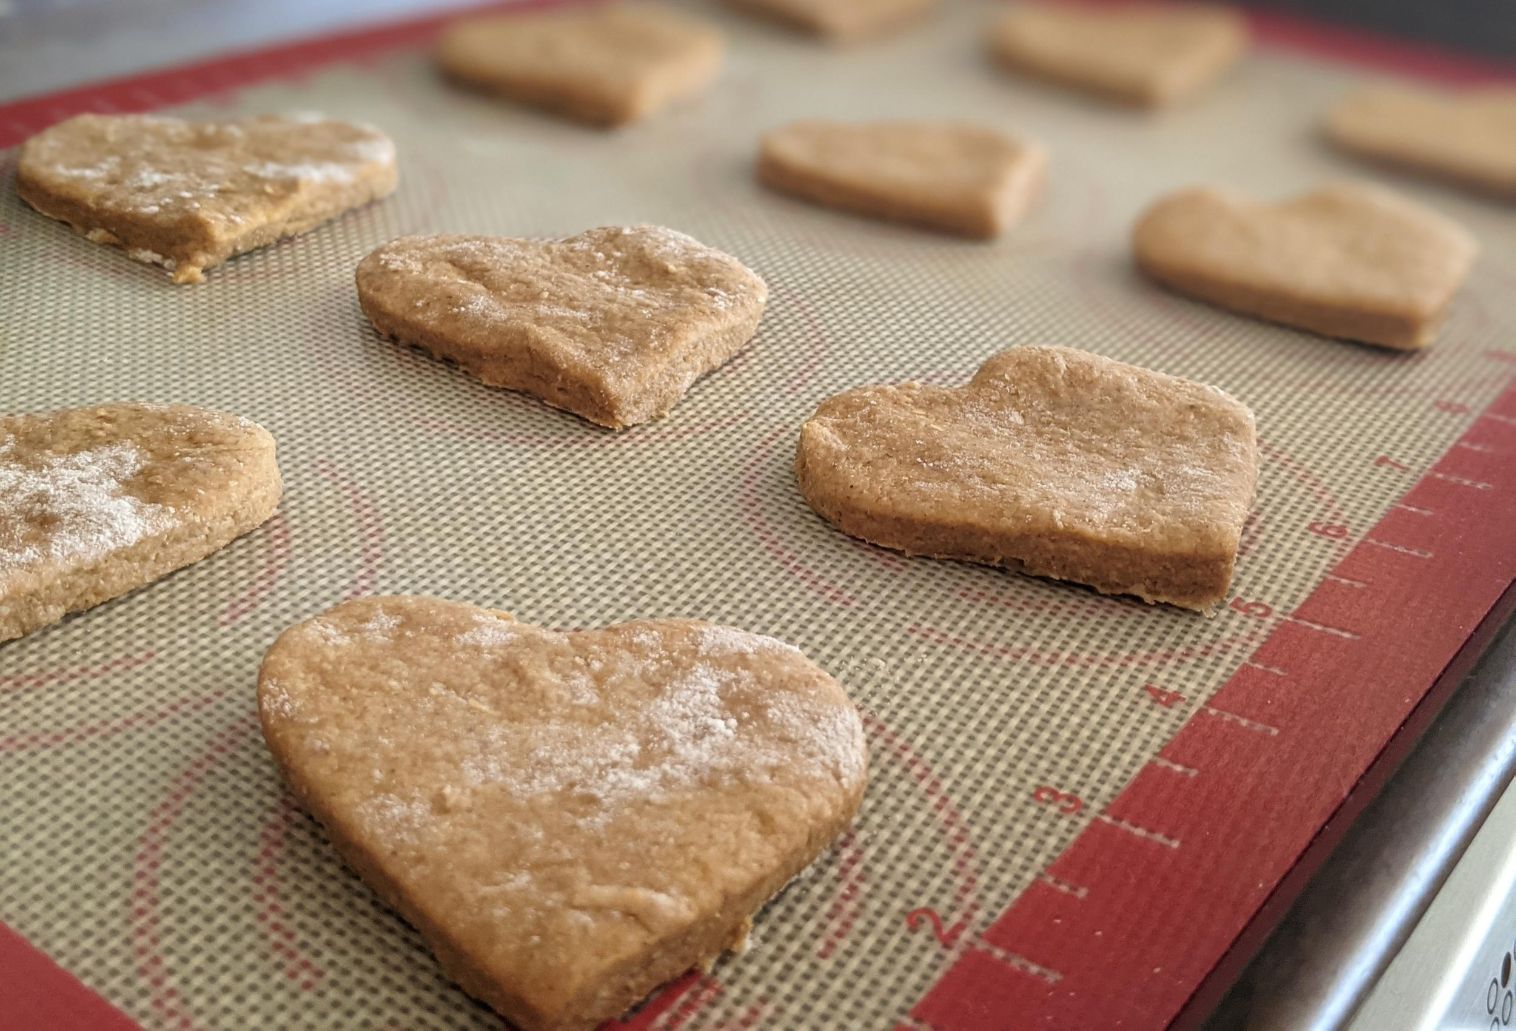 heart shaped dog cookies ready for baking on a baking sheet.